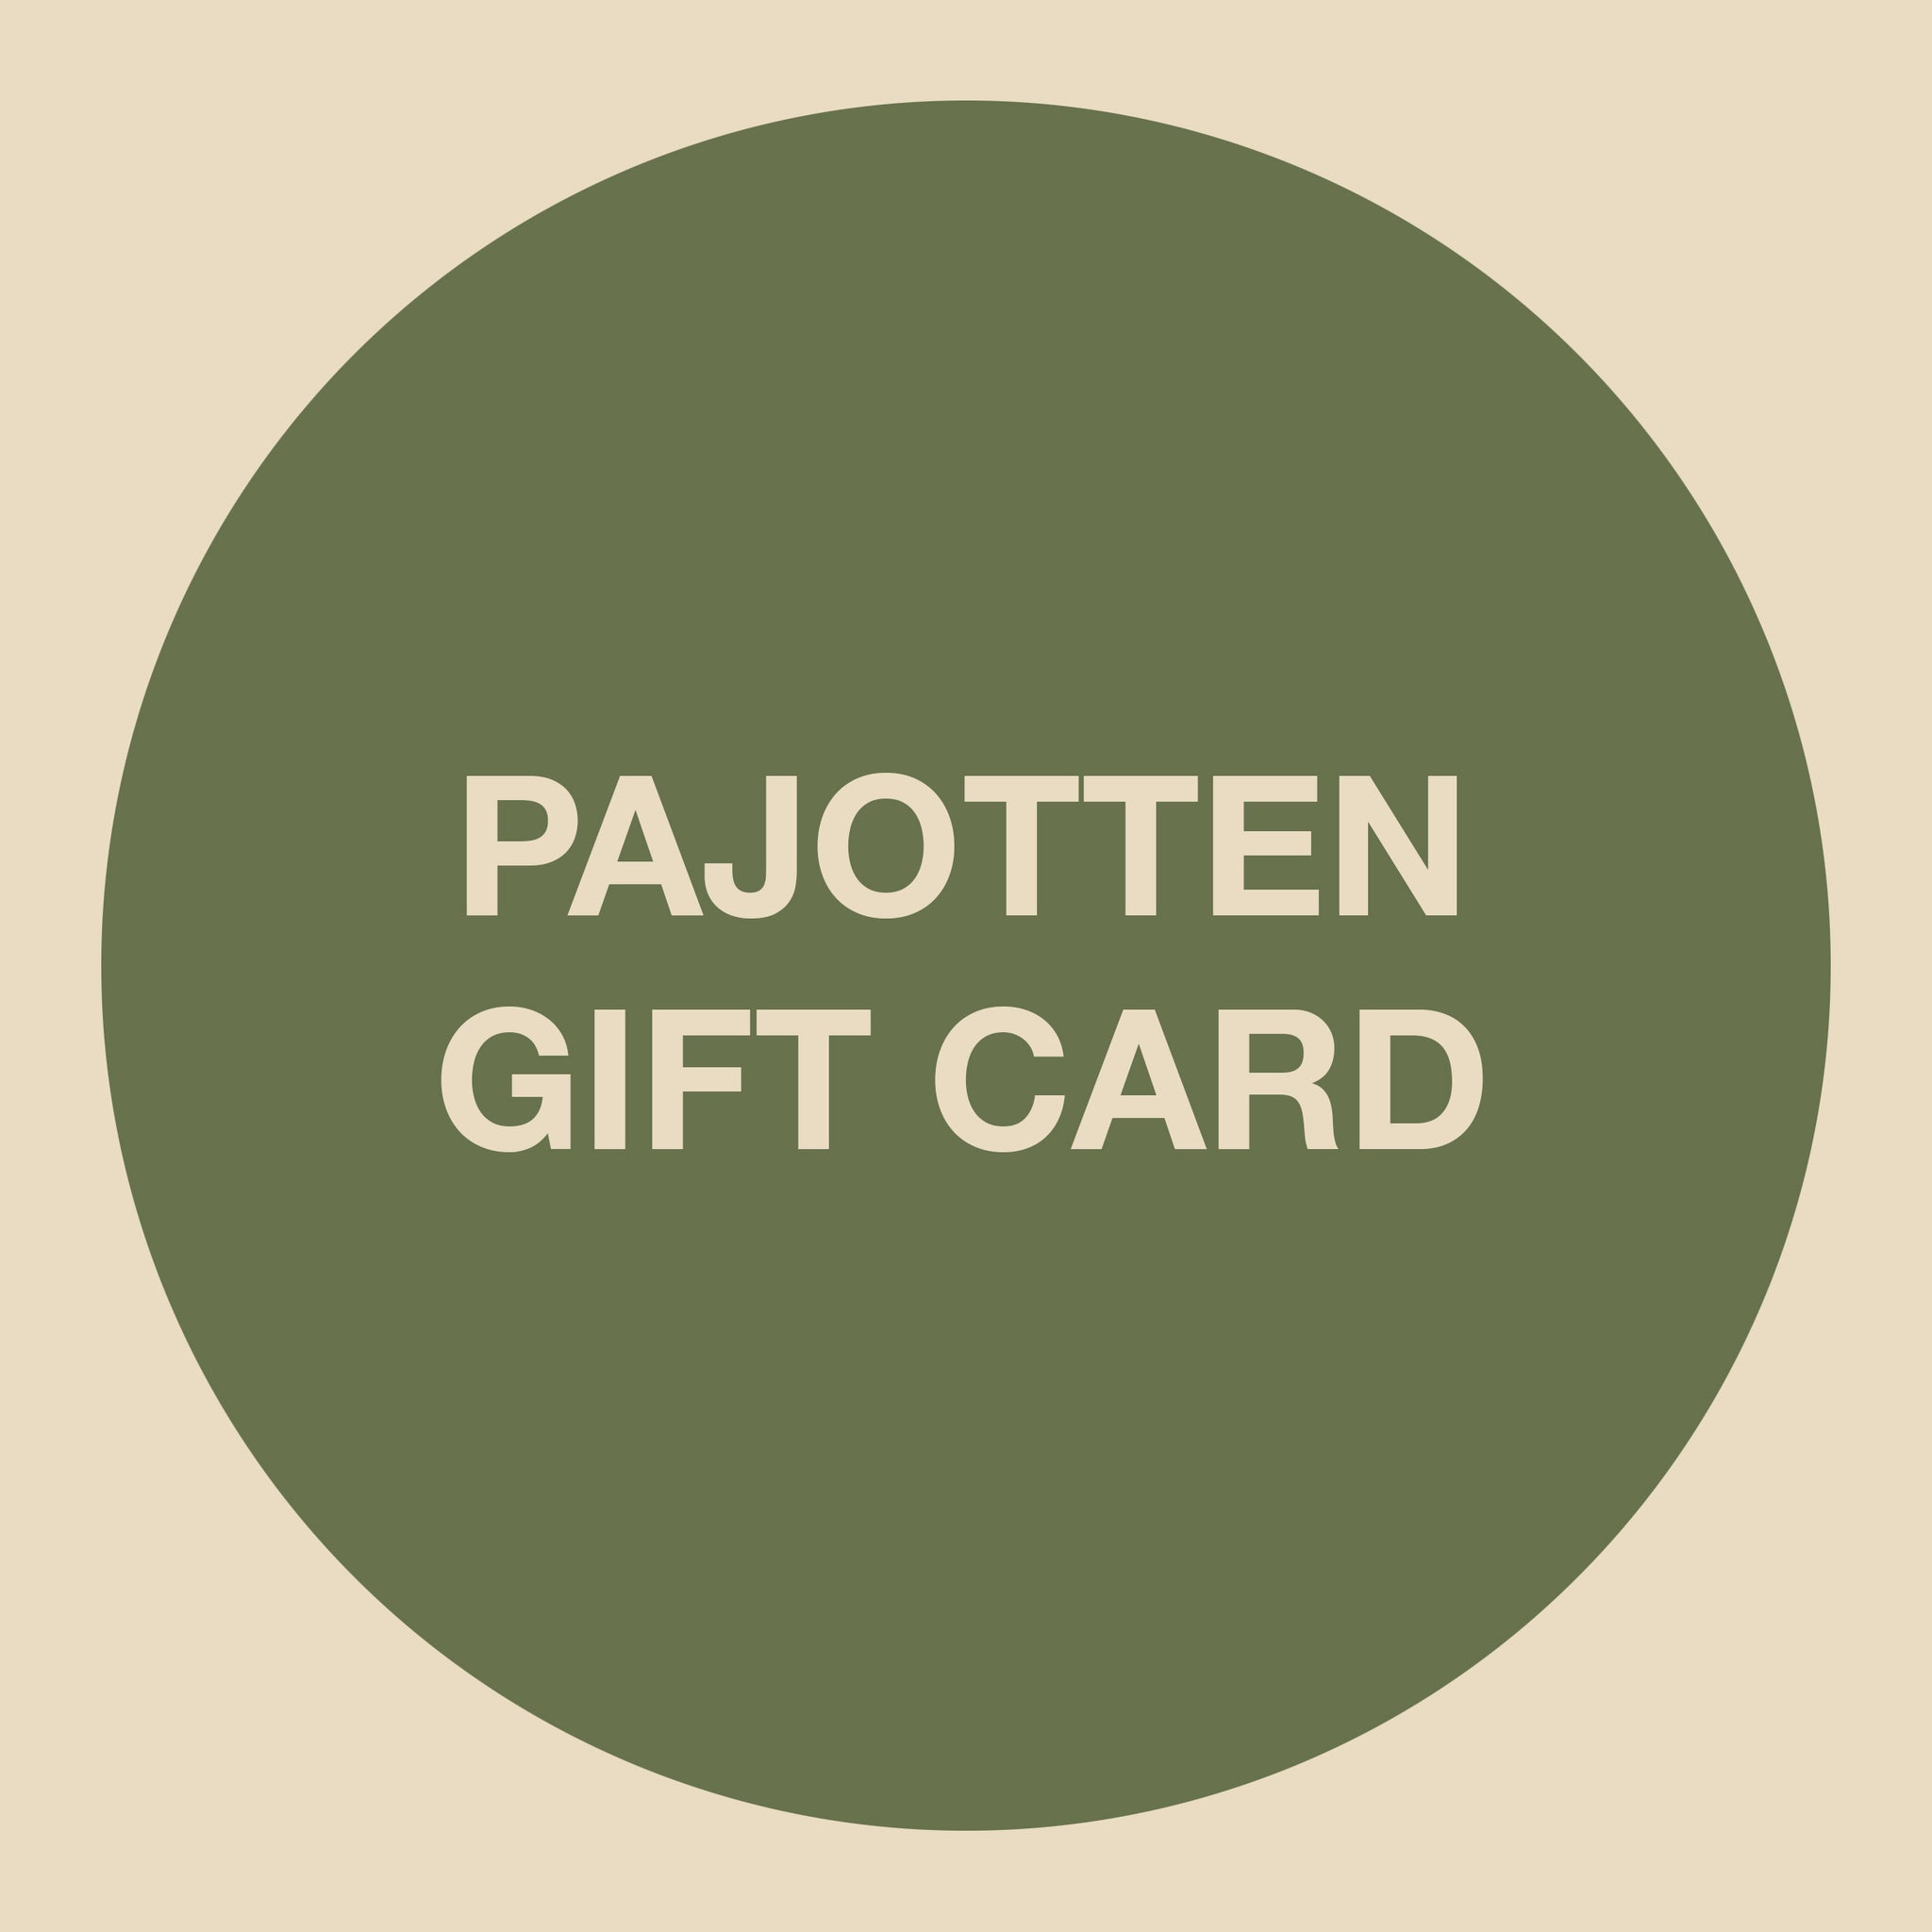 an image of a Pajotten gift card